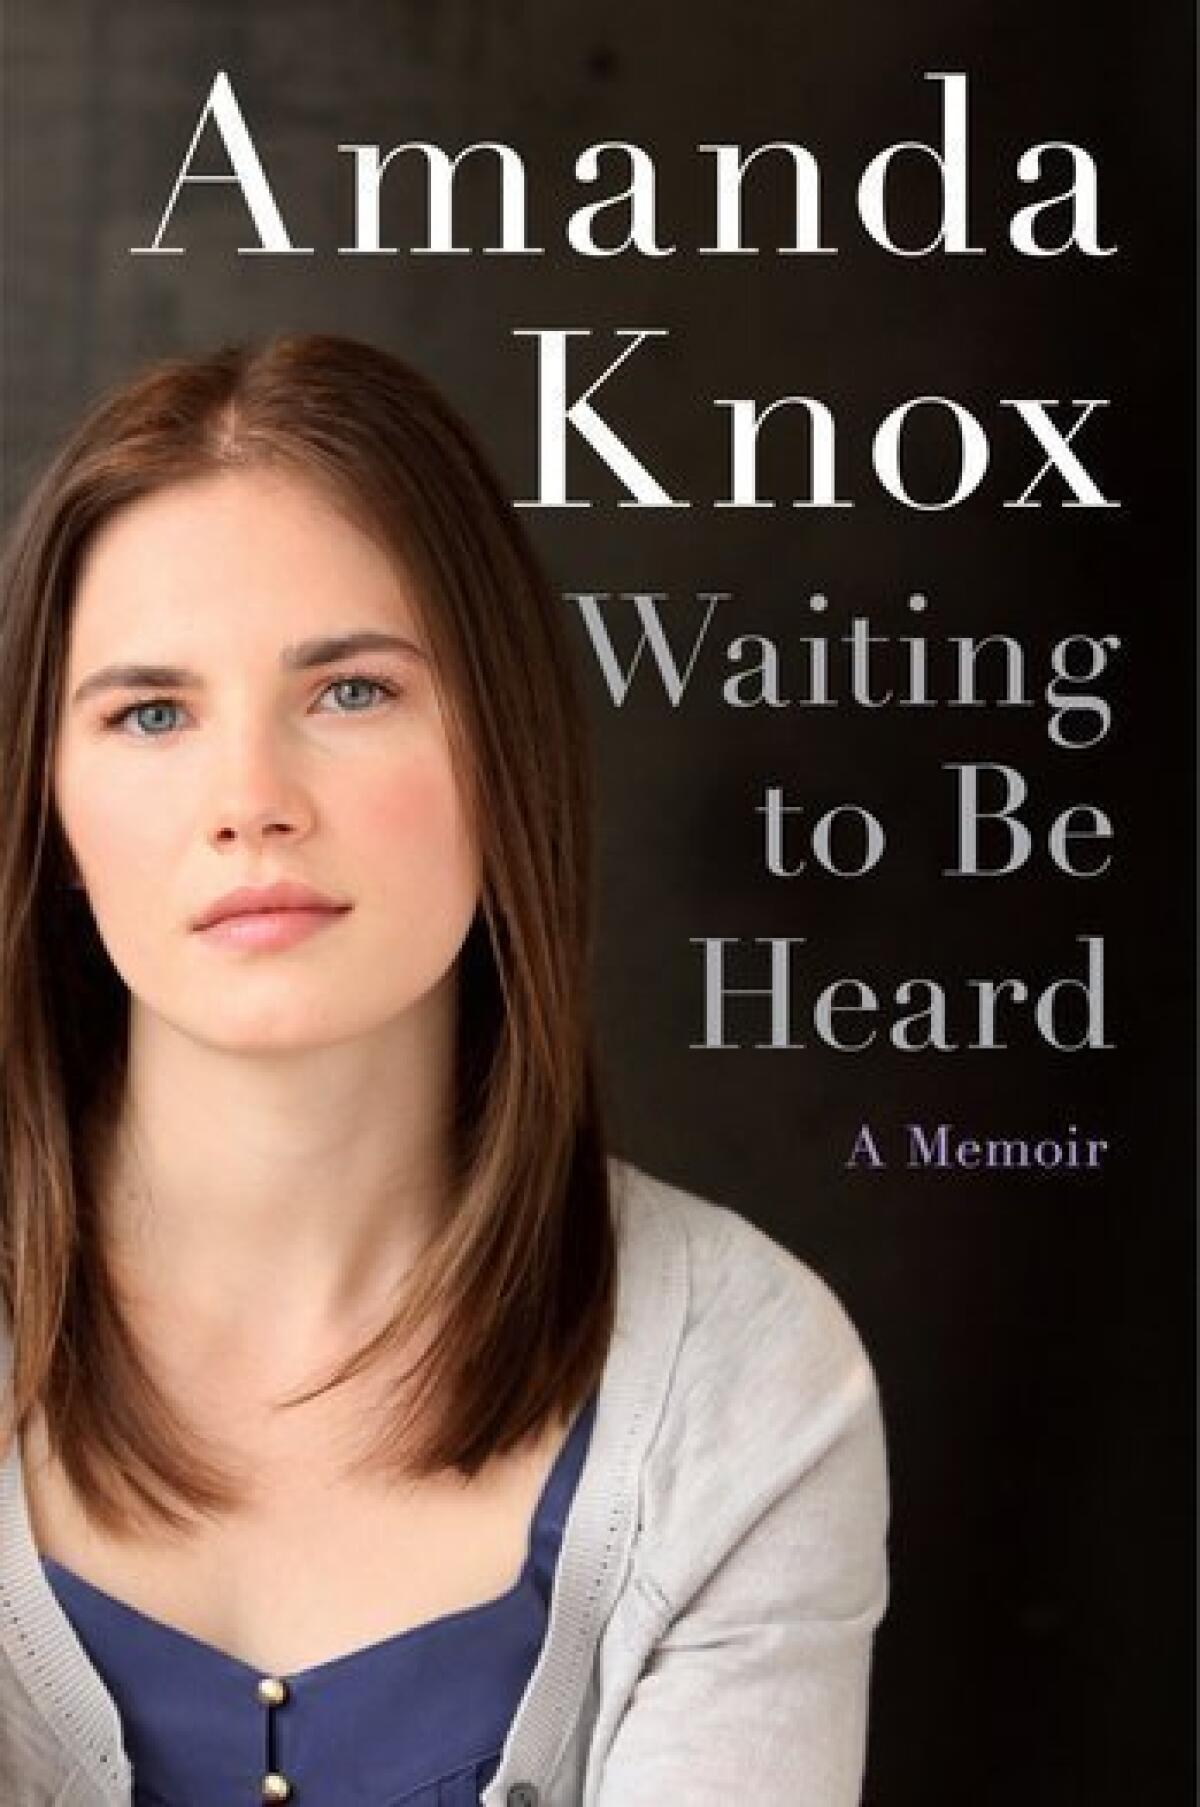 The book cover for "Waiting to Be Heard" by Amanda Knox.